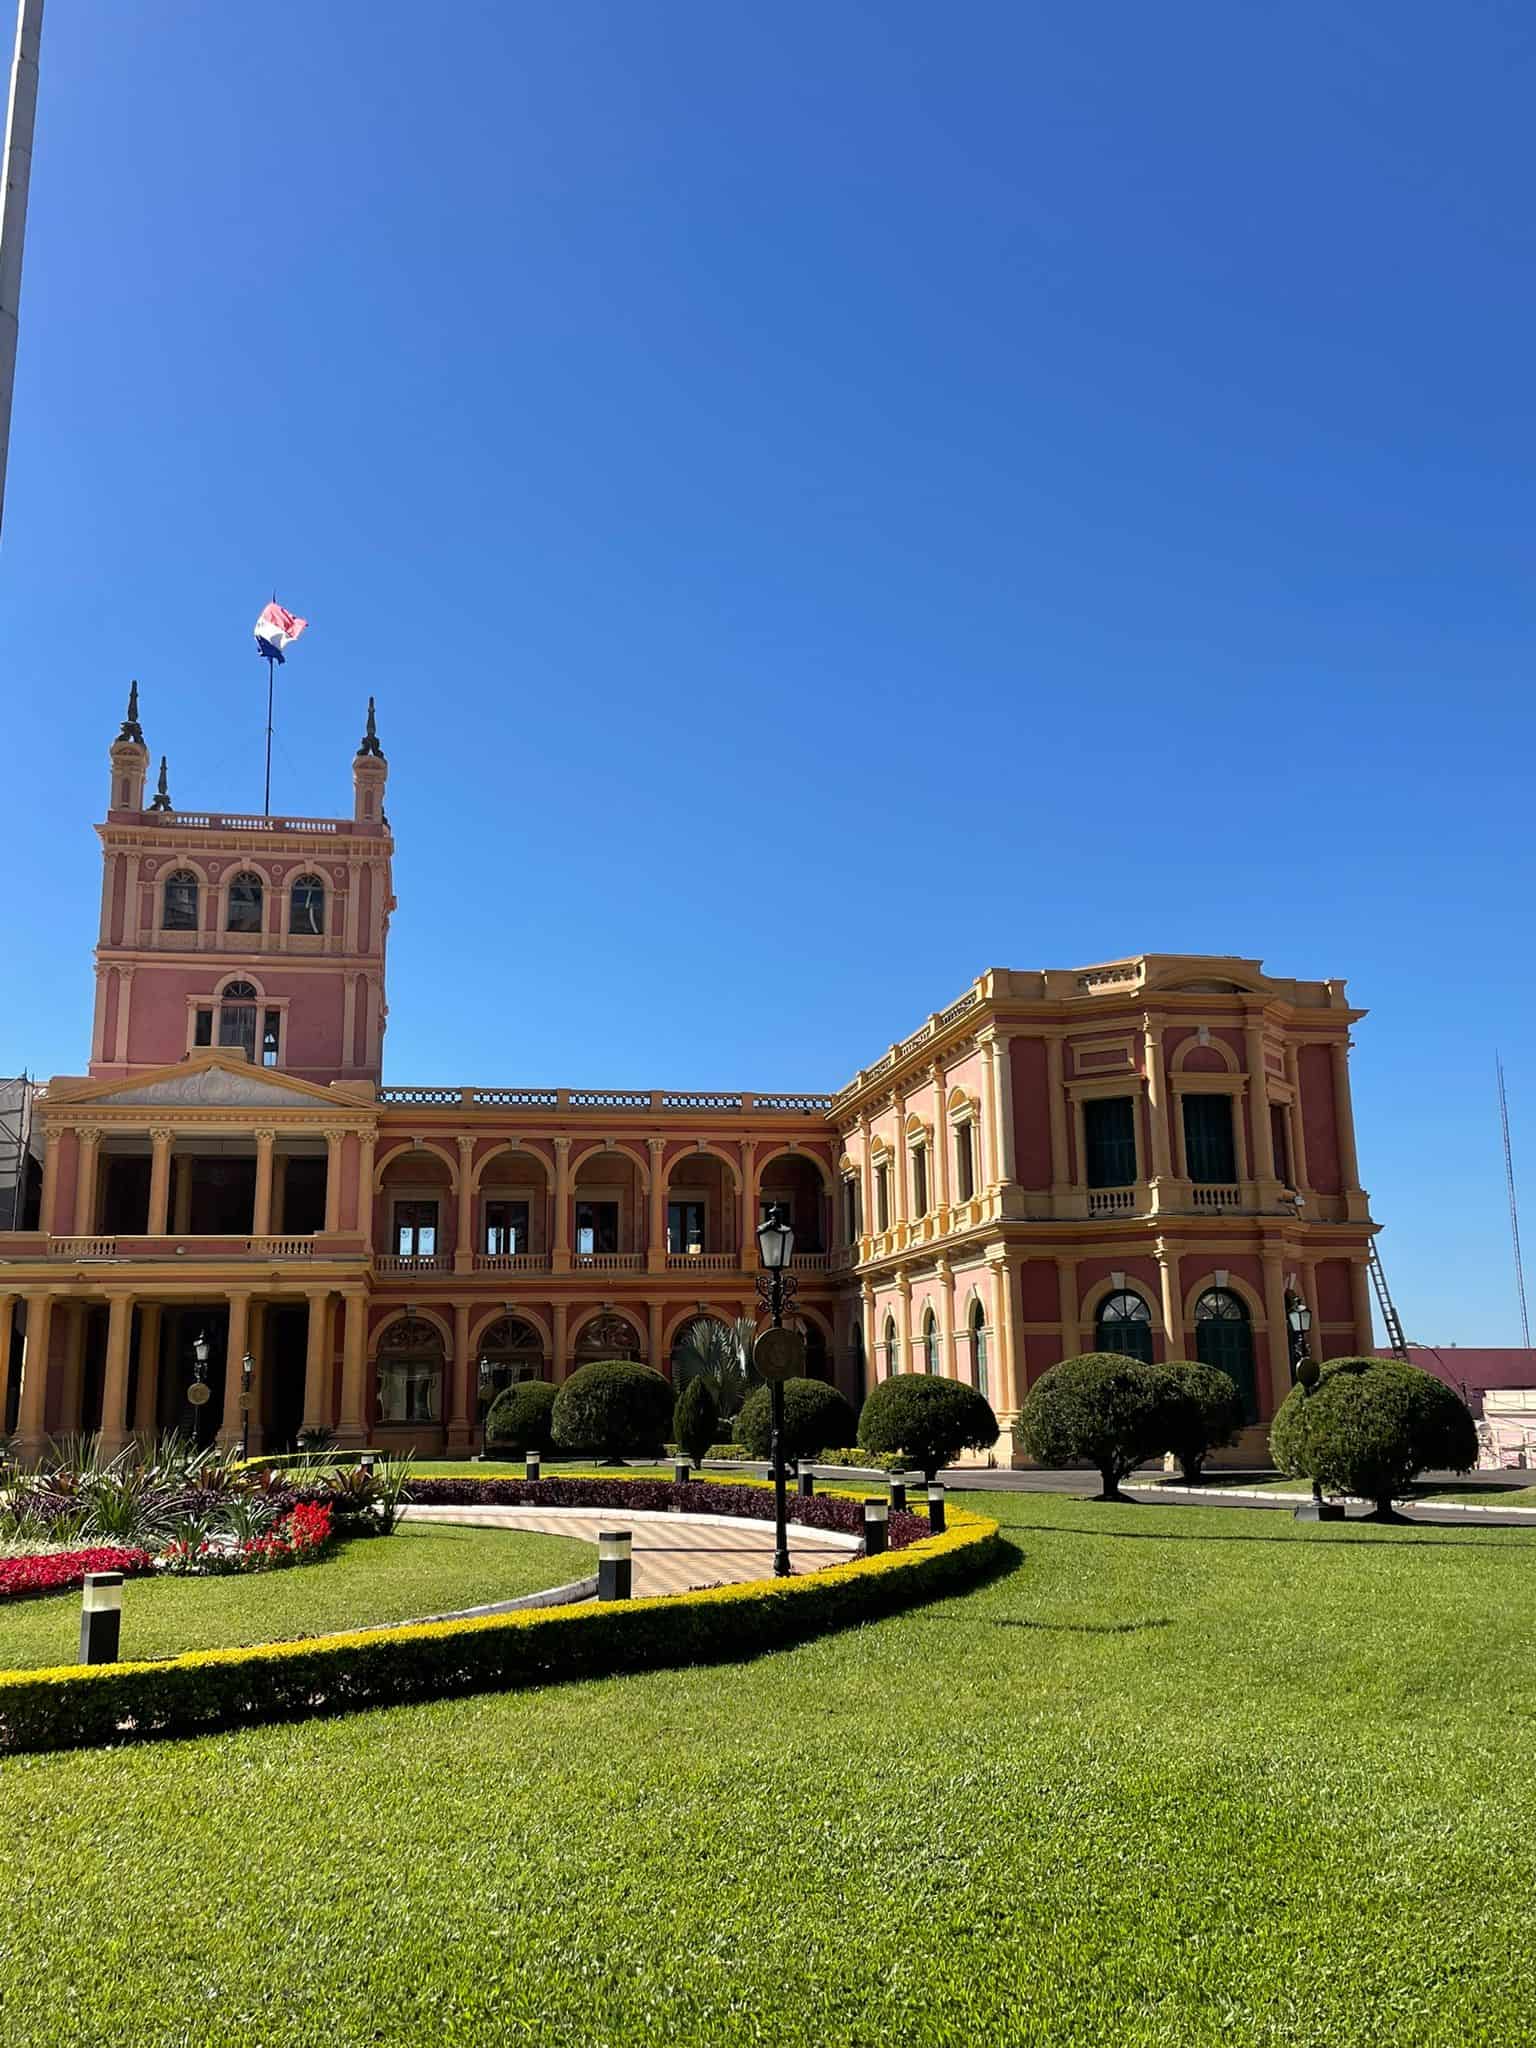 Palacio de los Lopez - The president's palace on a sunny day in Asuncion, Paraguay. You can see the grass in front of this brown building which has the Paraguay flag flying at the top